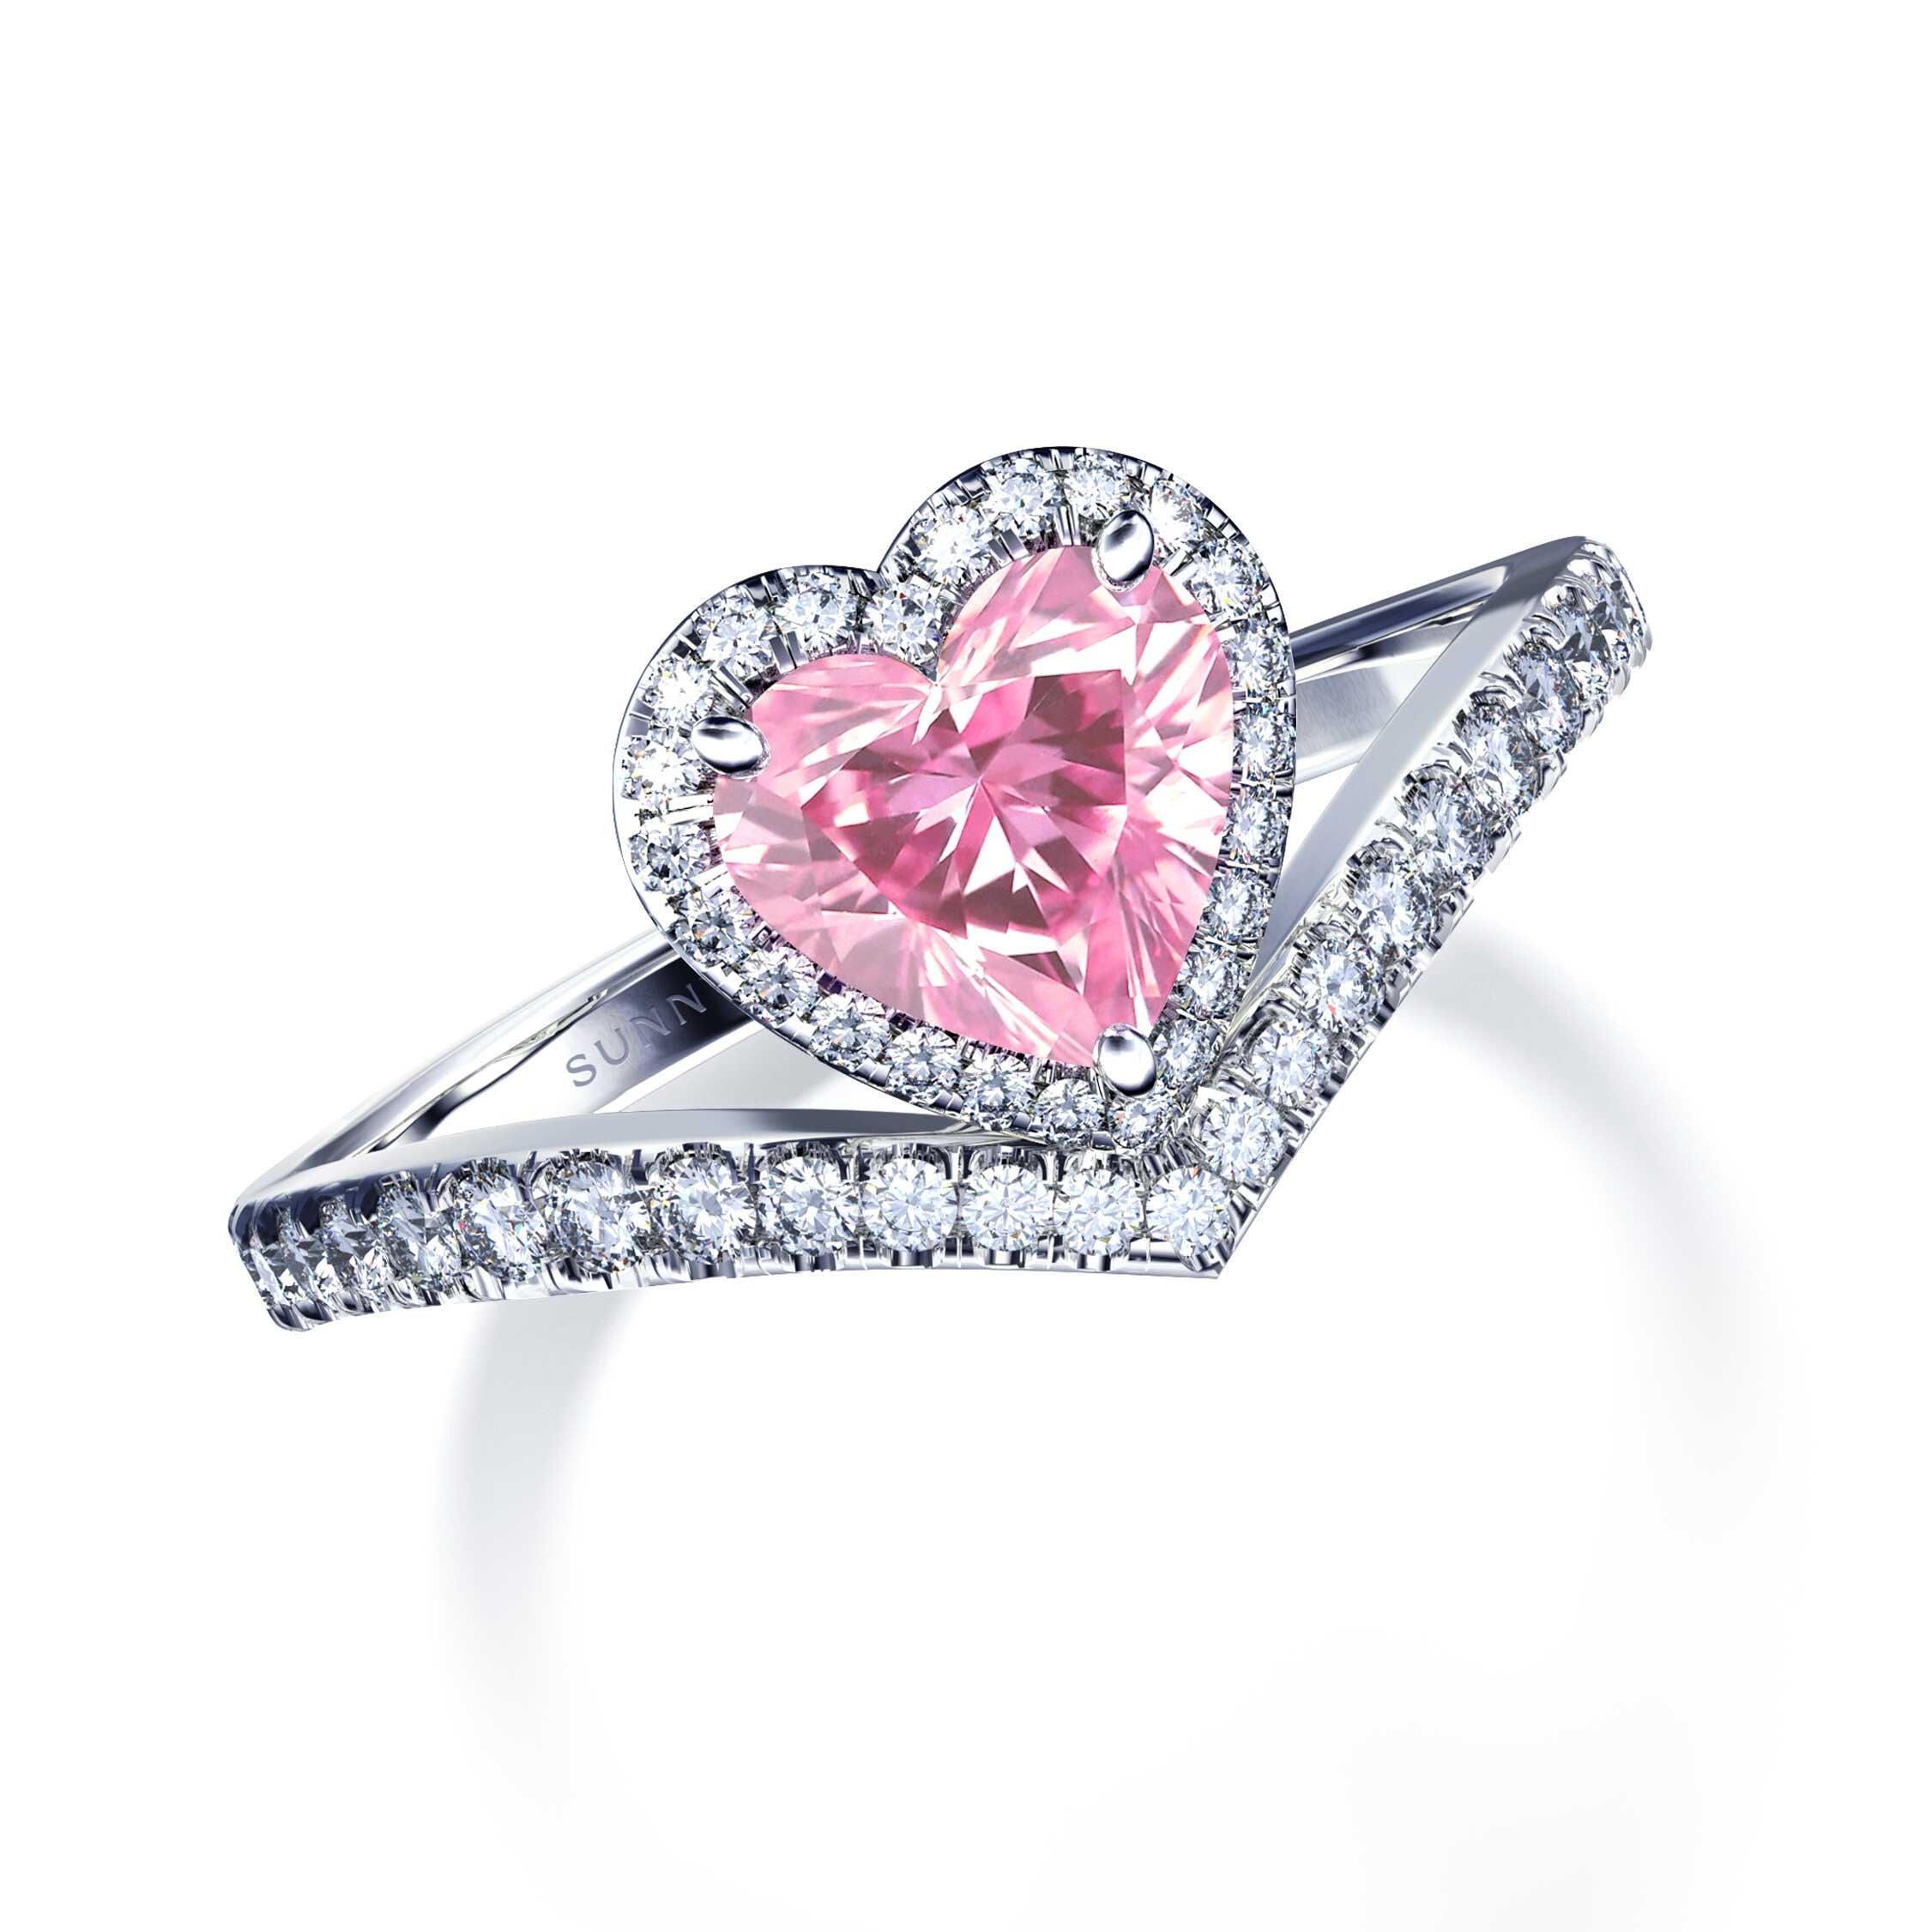 2020 Fashionable Silver Pink Heart Gemstone Heart Shaped Wedding Ring With  Simulated Diamonds For Women Perfect For Engagement And Special Occasions  From Xvwed, $16.25 | DHgate.Com